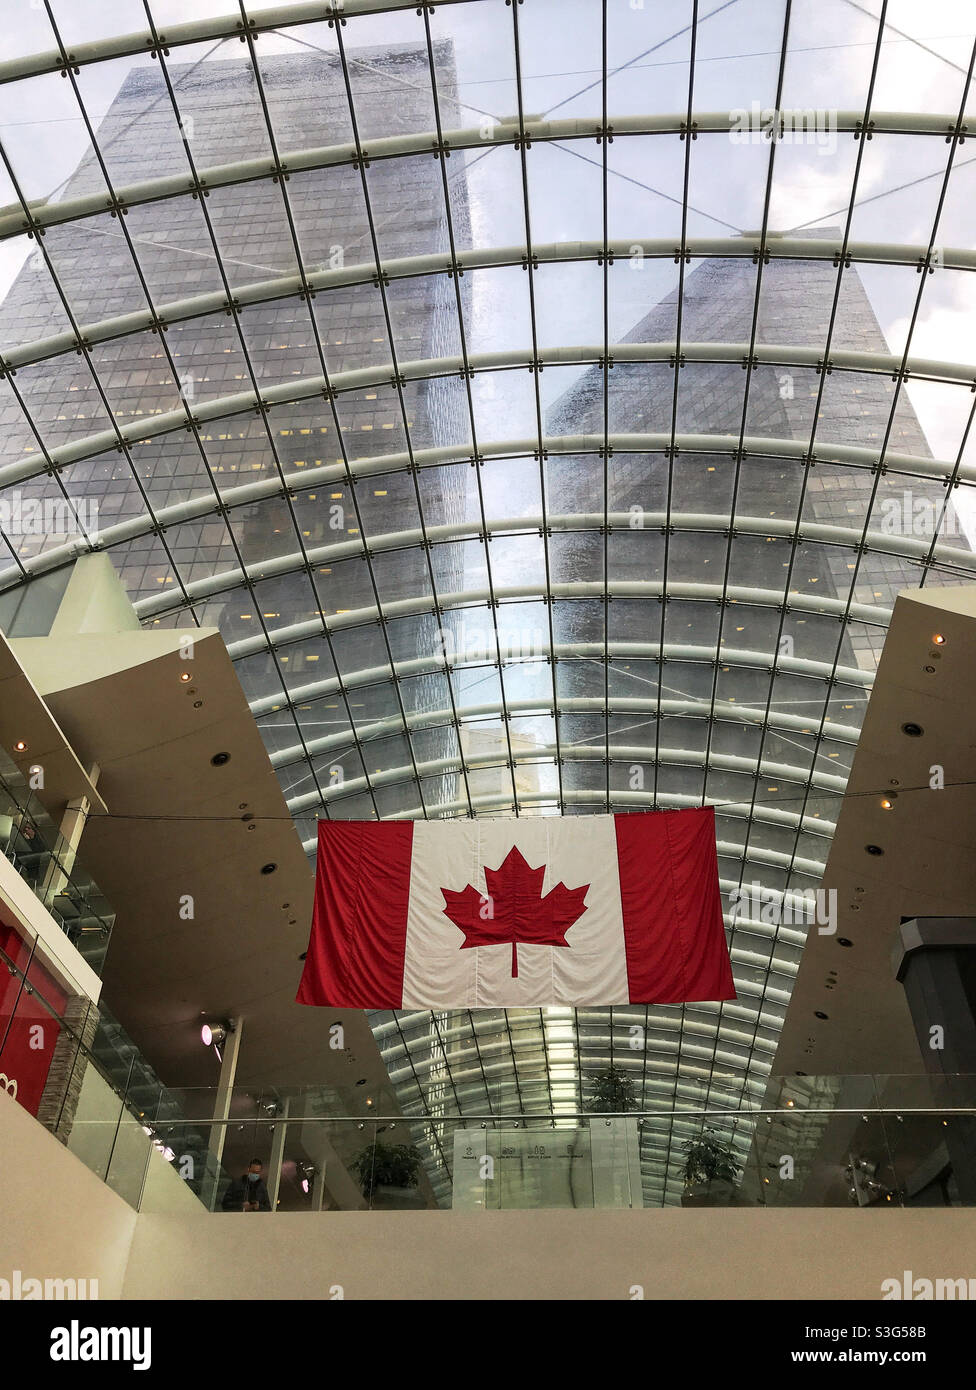 The Canadian flag hanging from the glass ceiling of The Core shopping centre. Downtown Calgary, Alberta, Canada. Stock Photo